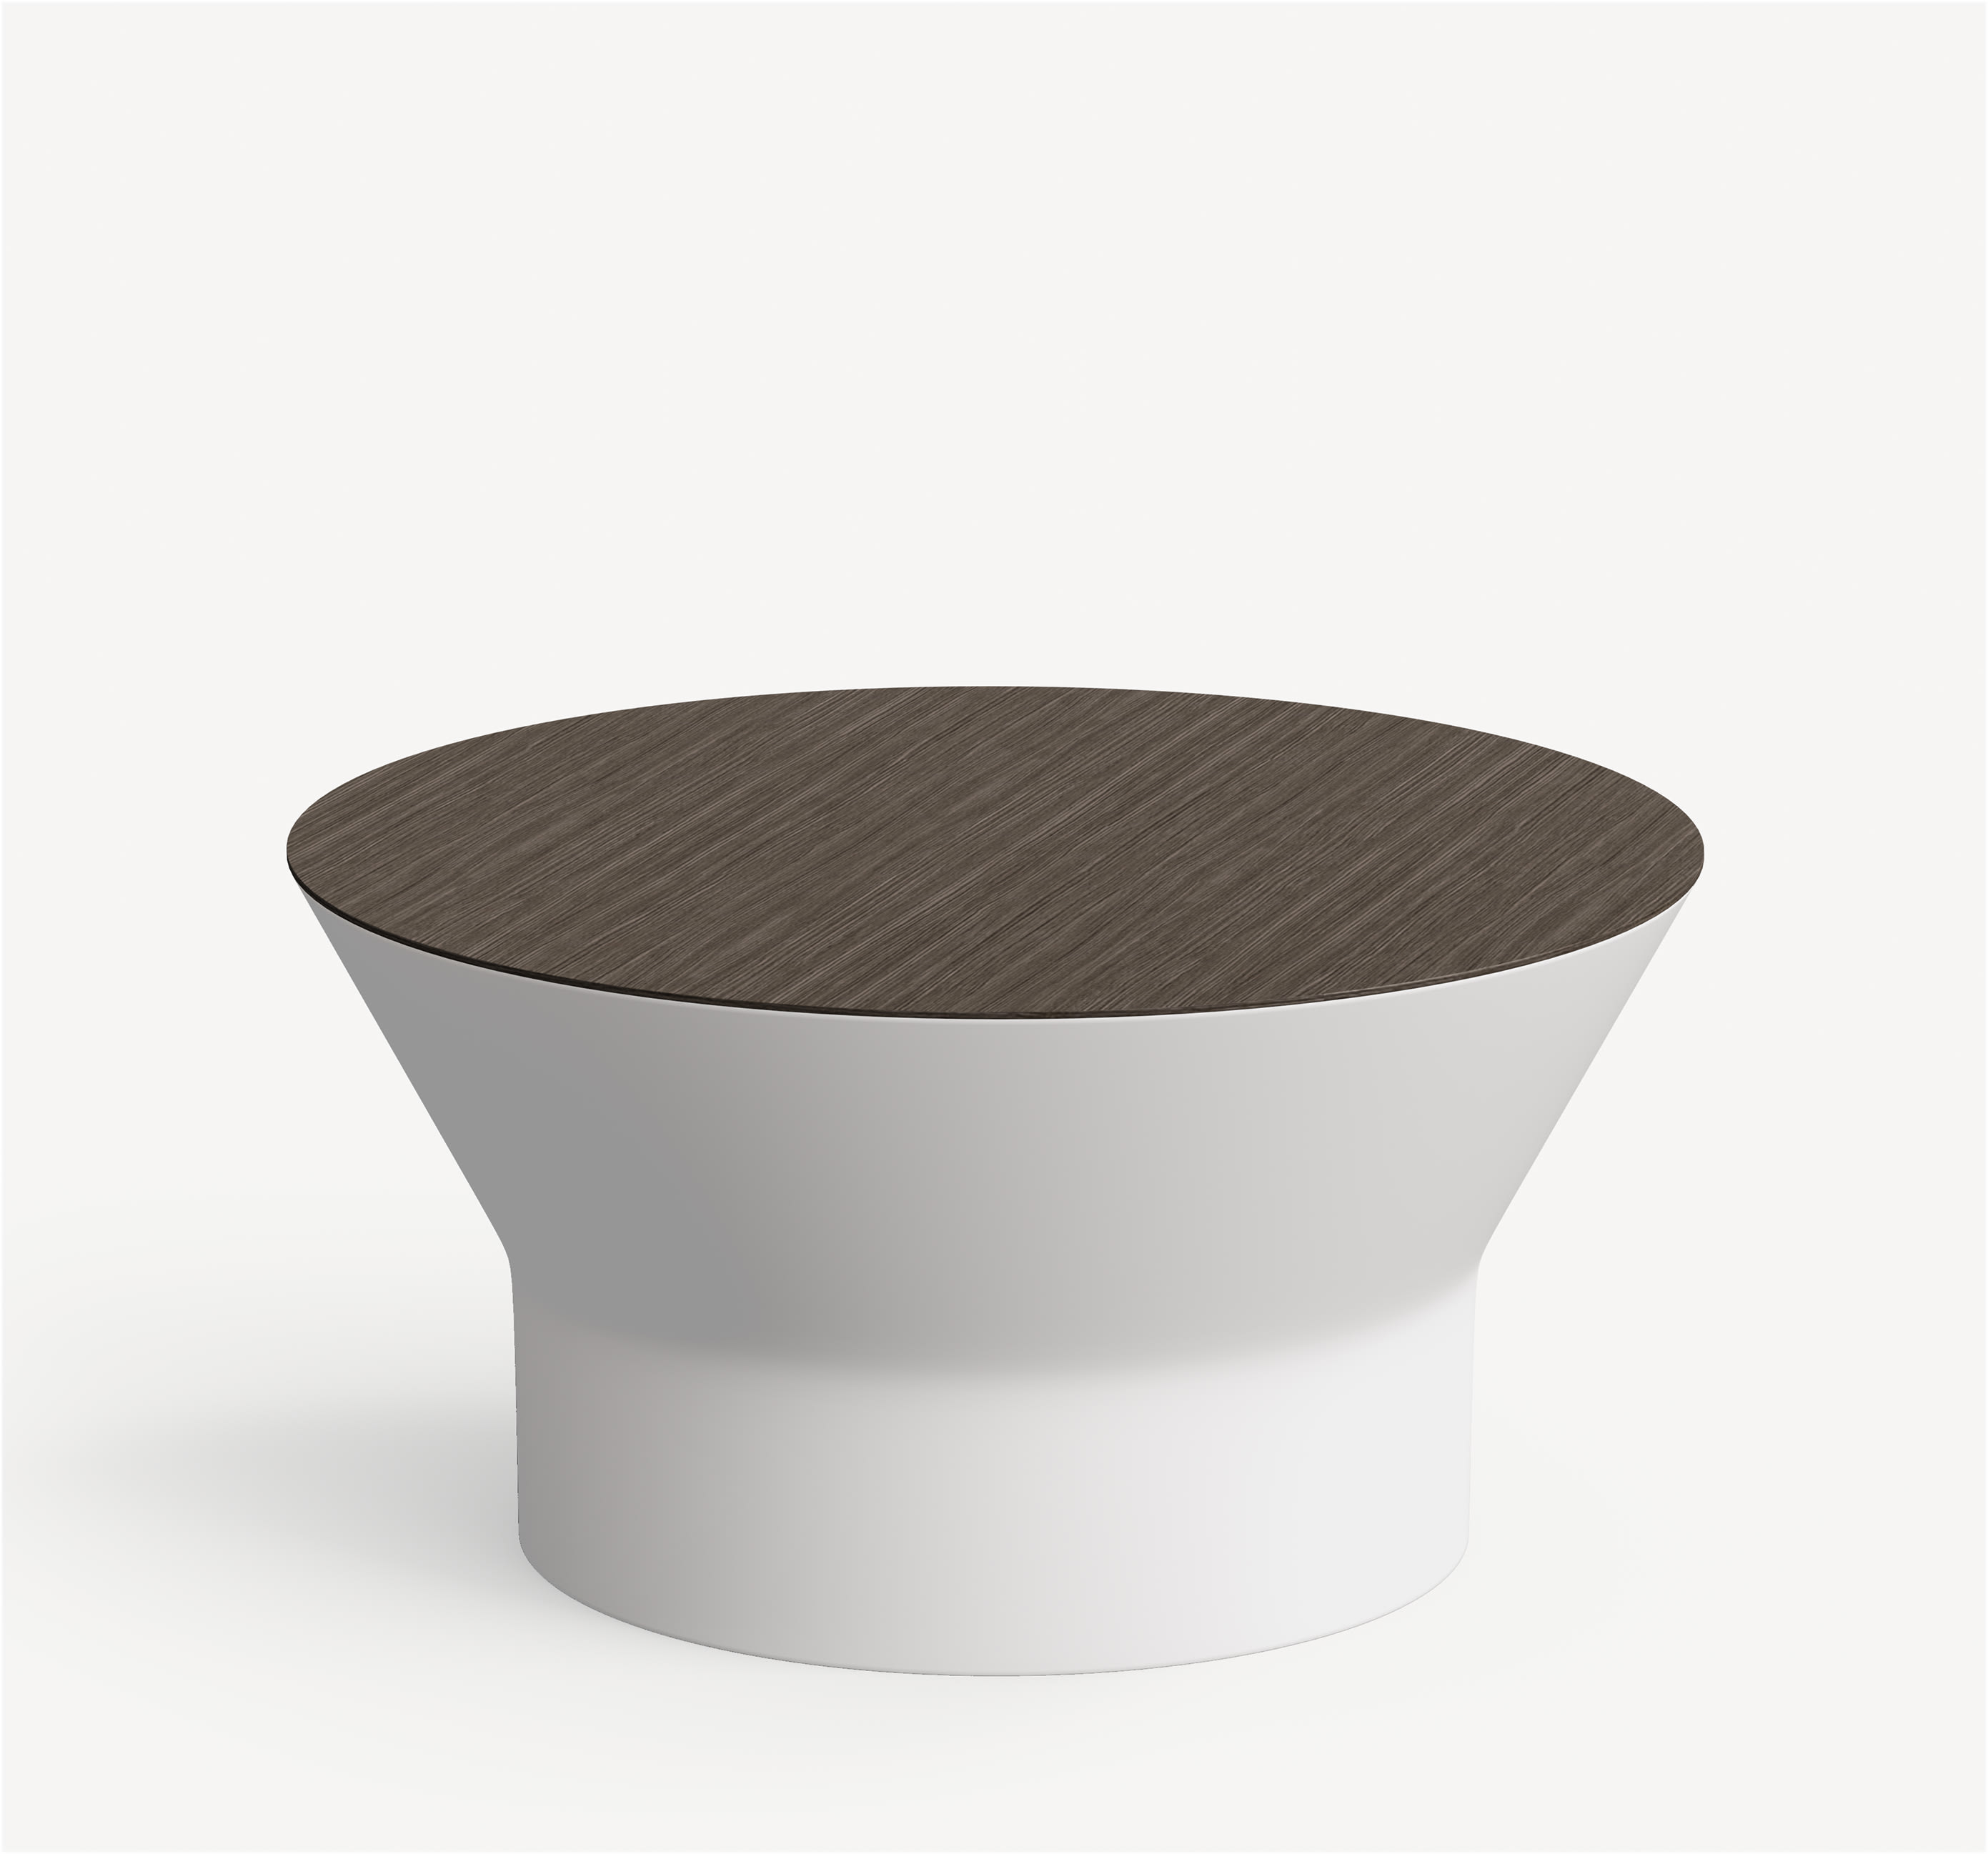 Hourglass shaped Belong coffee table with a white aluminum base and brown veneer table top.